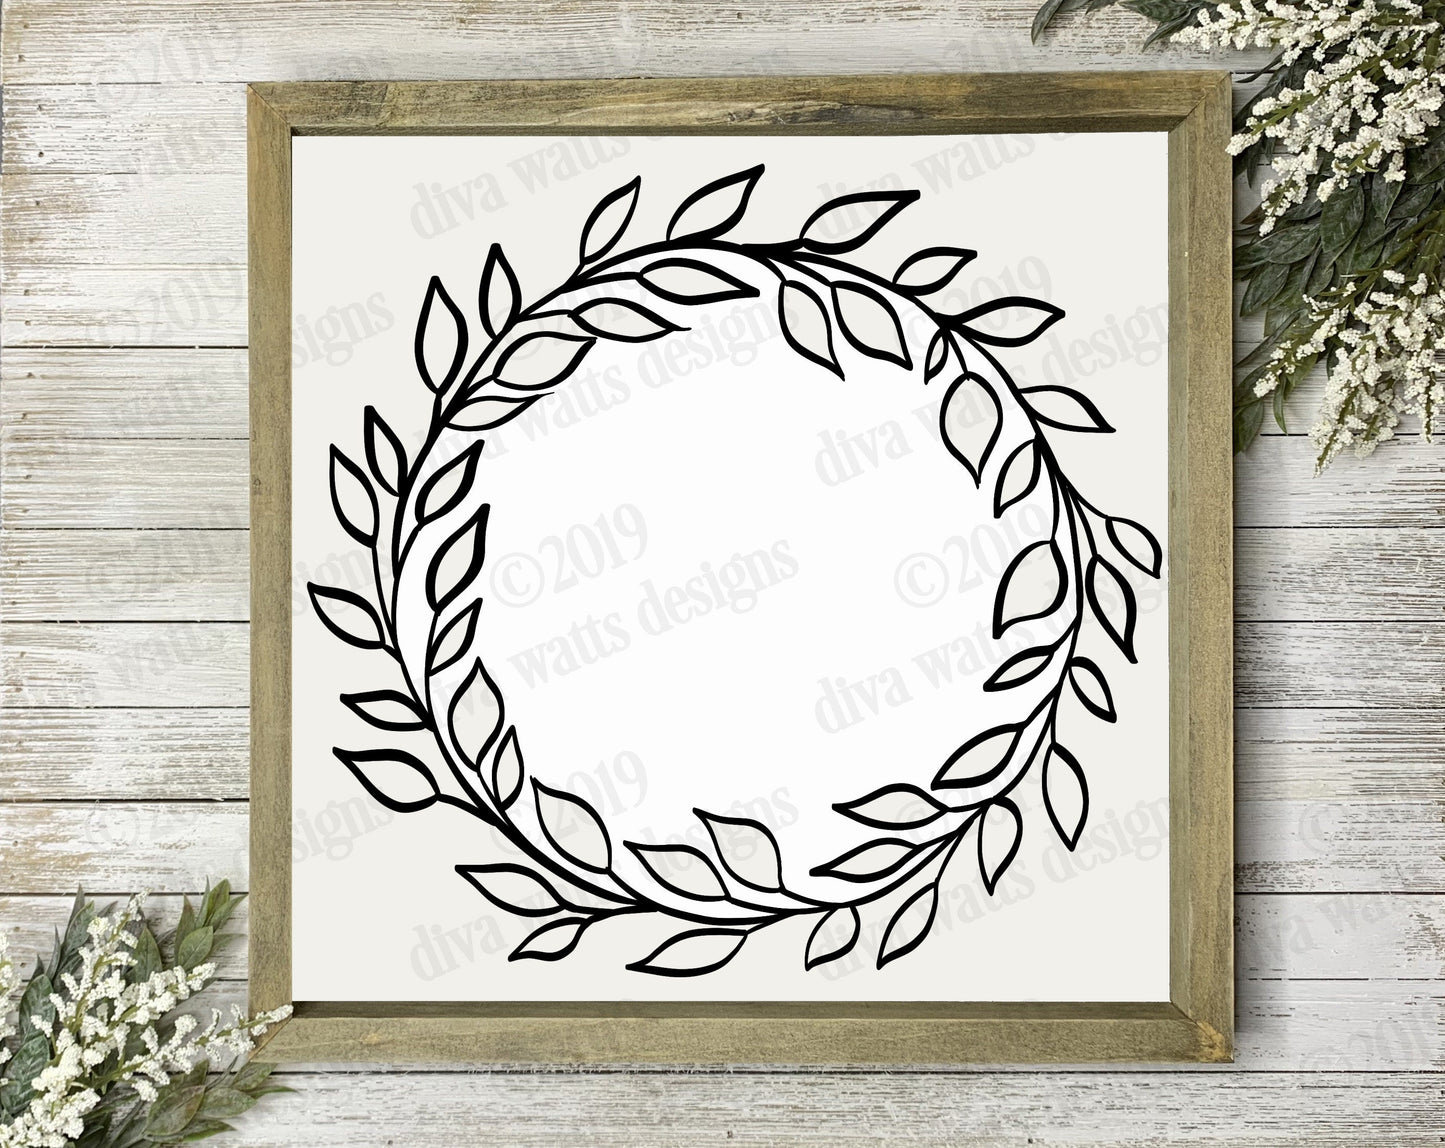 SVG Clipart Farmhouse Wreath | DXF PNG jpg eps | Instant Download Cutting File | Vinyl Stencil | Paper Projects | Signs | Rustic | Vintage